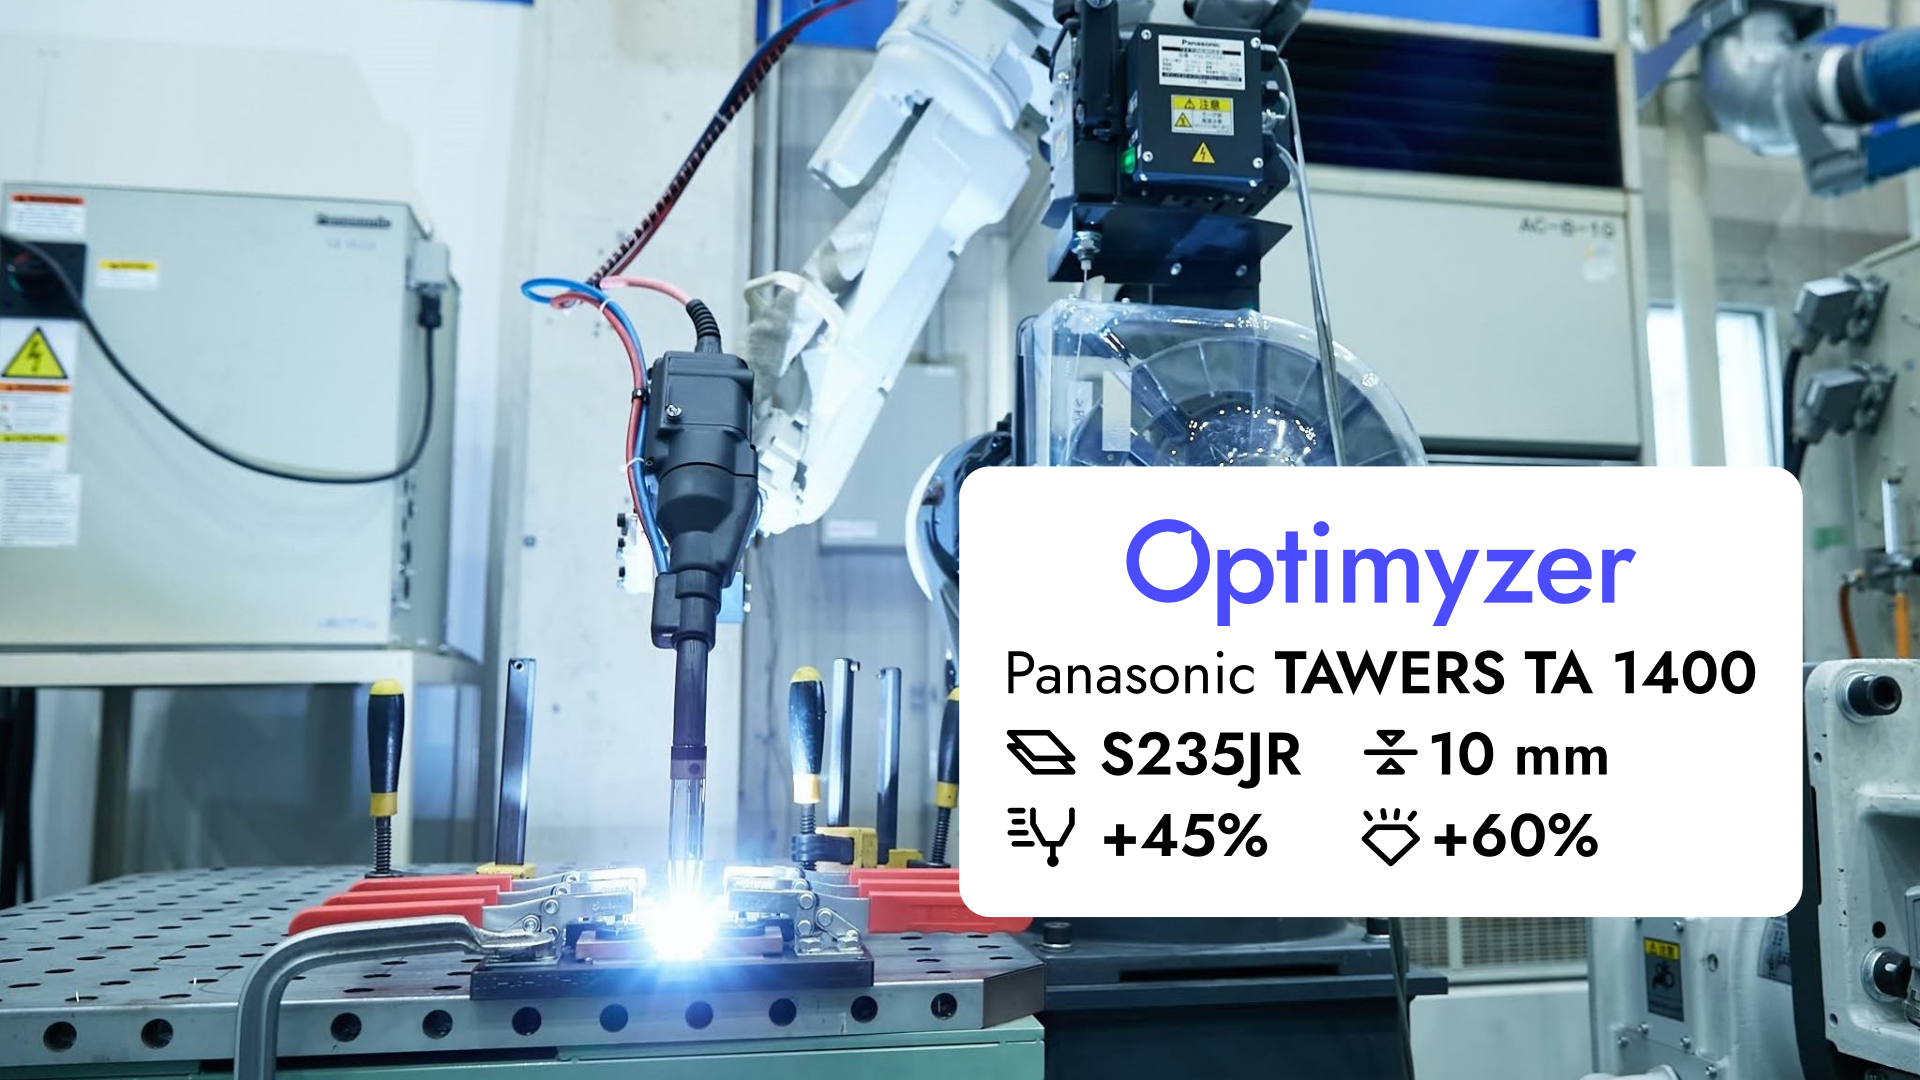 Panasonic TAWERS TA 1400 welding robot in action, symbolizing the fusion of advanced robotics and AI-driven optimization.